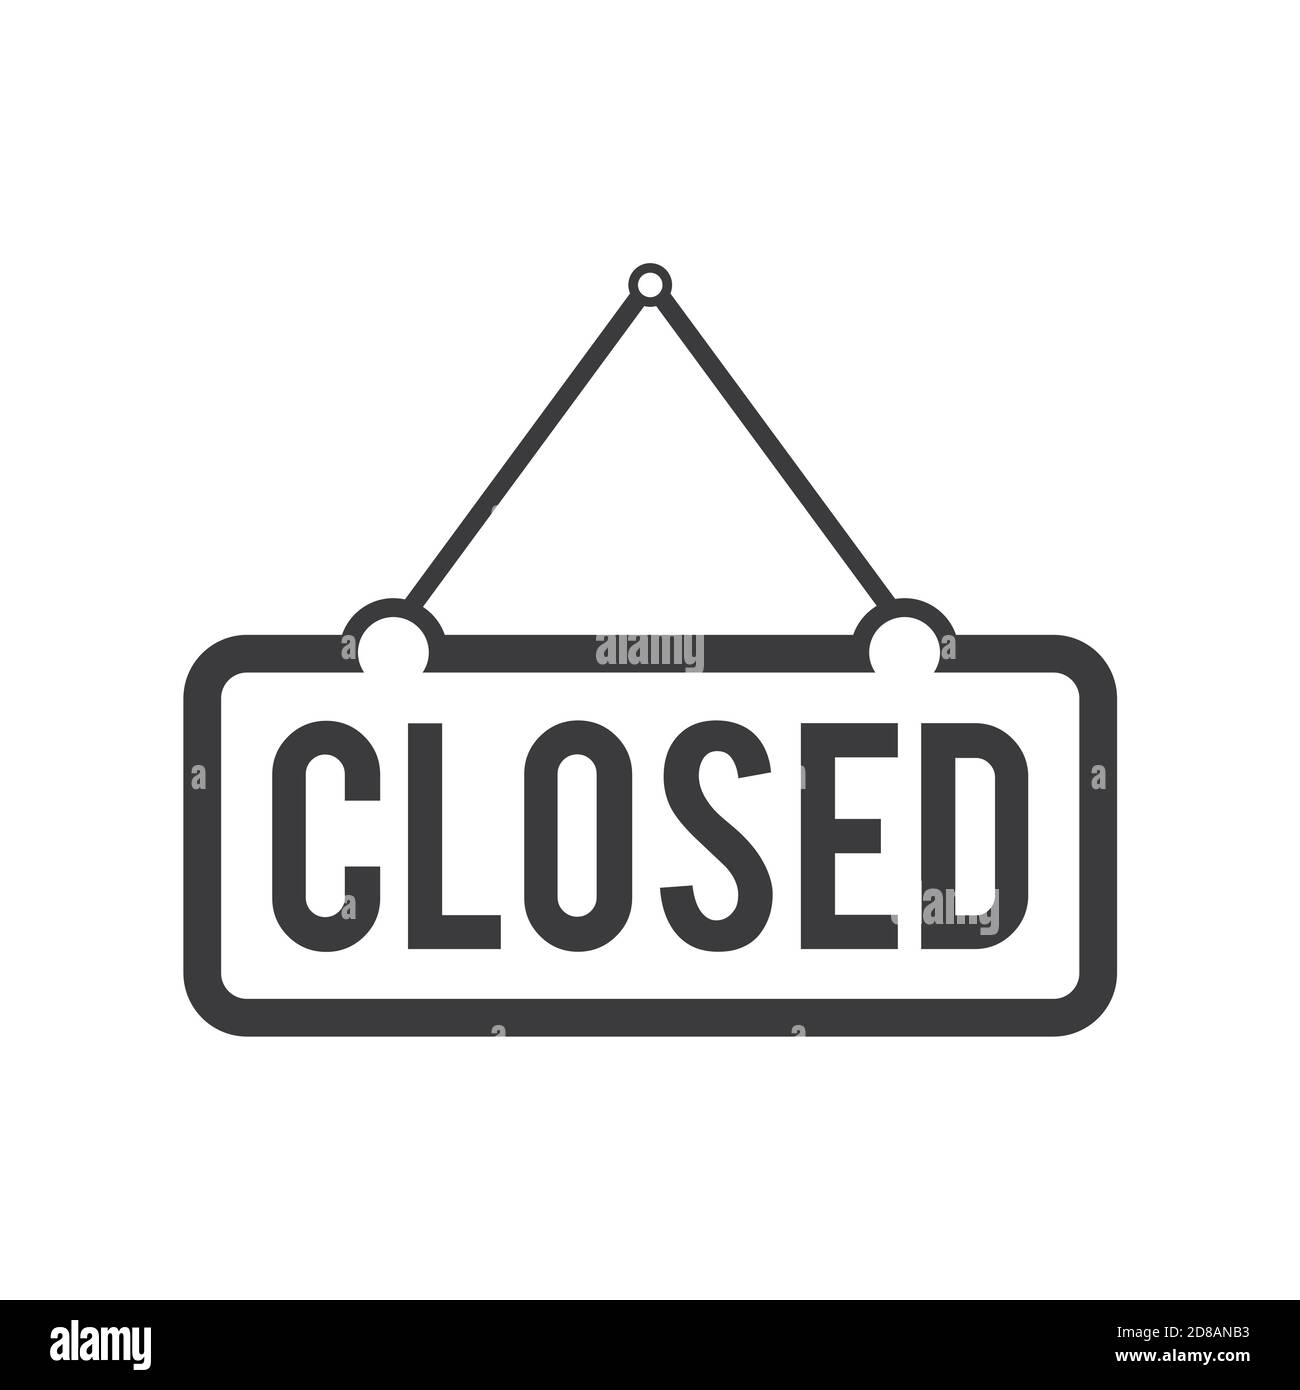 Closed sign trendy vector icon template. Hanging frame closed sign icon design. Stock Vector